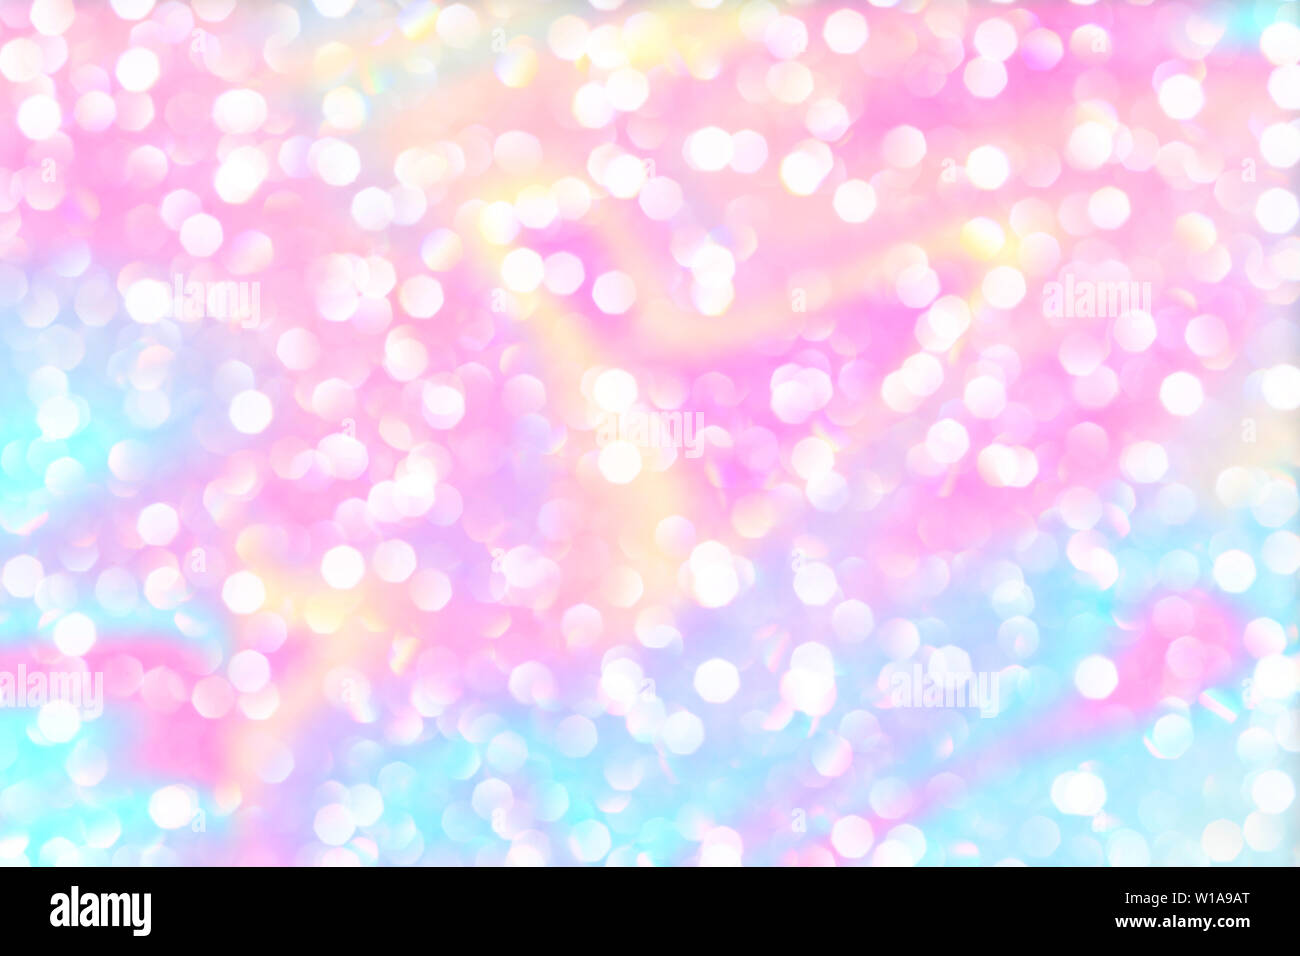 Beautiful abstract background of holiday lights bokeh in trendy colors. Wallpaper design. Stock Photo